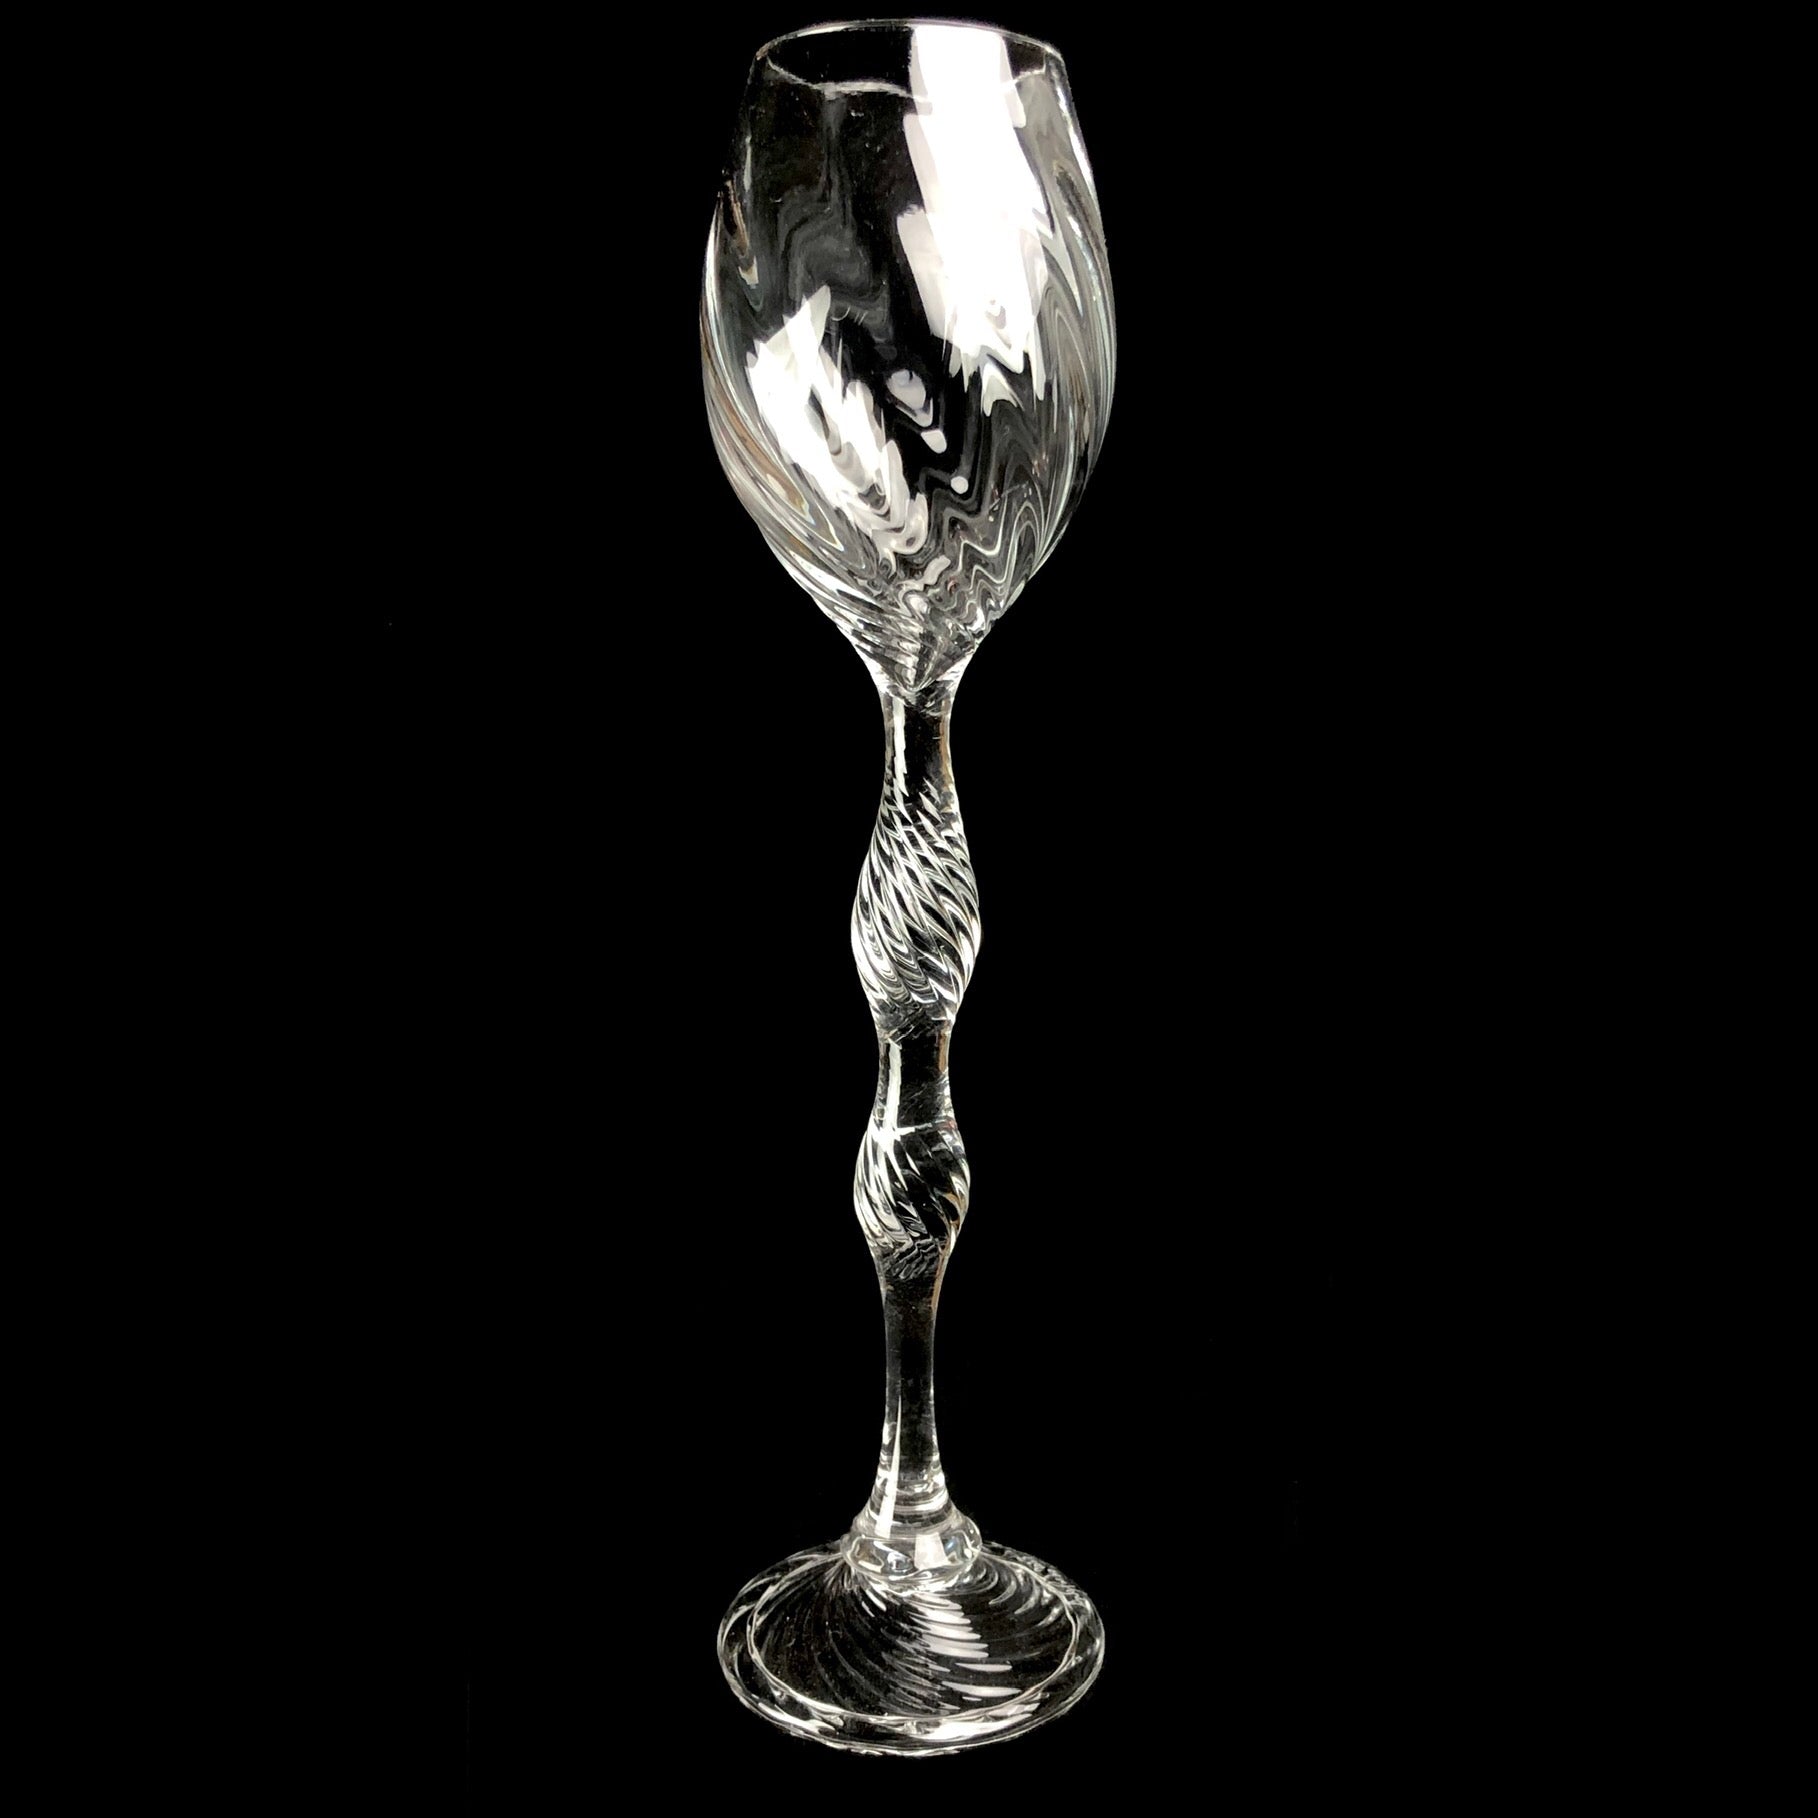 Clear glass goblet with intricate ribbed surface design